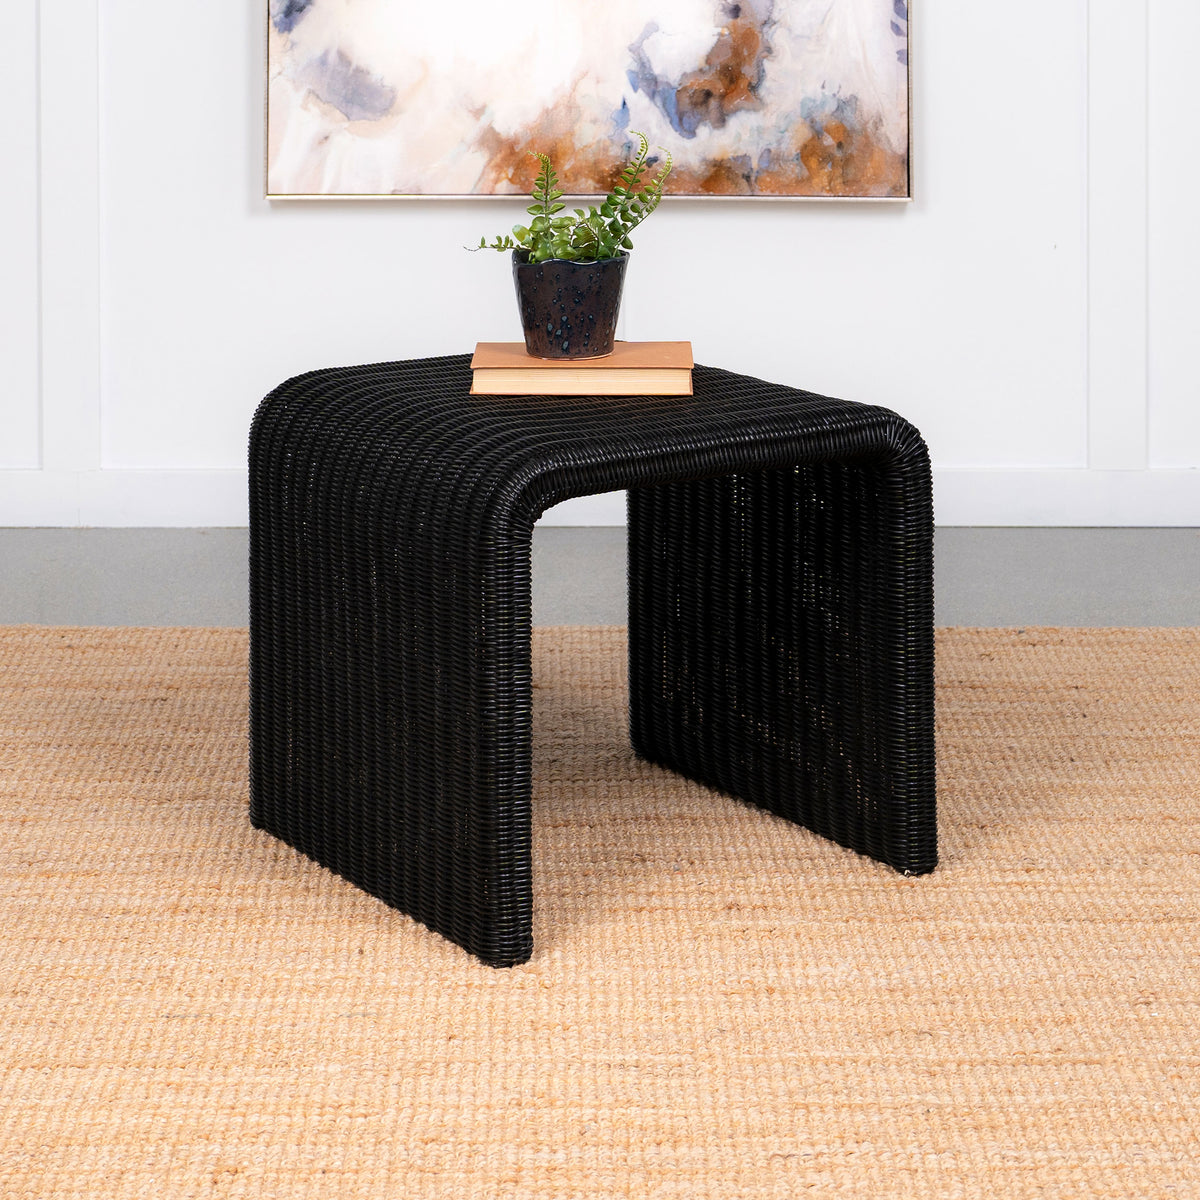 Cahya Woven Rattan Sqaure End Table Black Cahya Woven Rattan Sqaure End Table Black Half Price Furniture